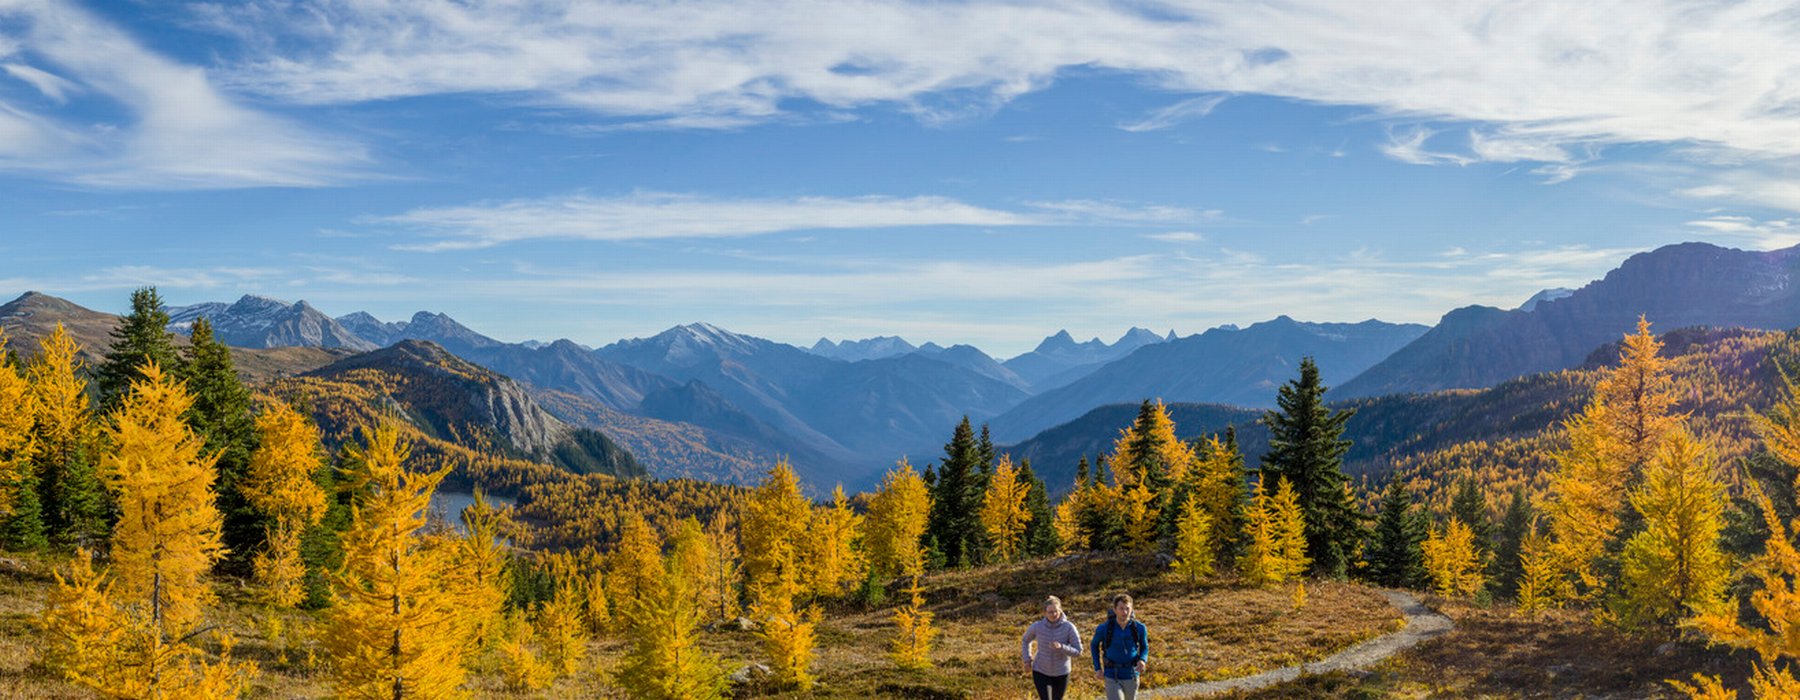 Couple jogging on a path in Sunshine Meadows during larch season.